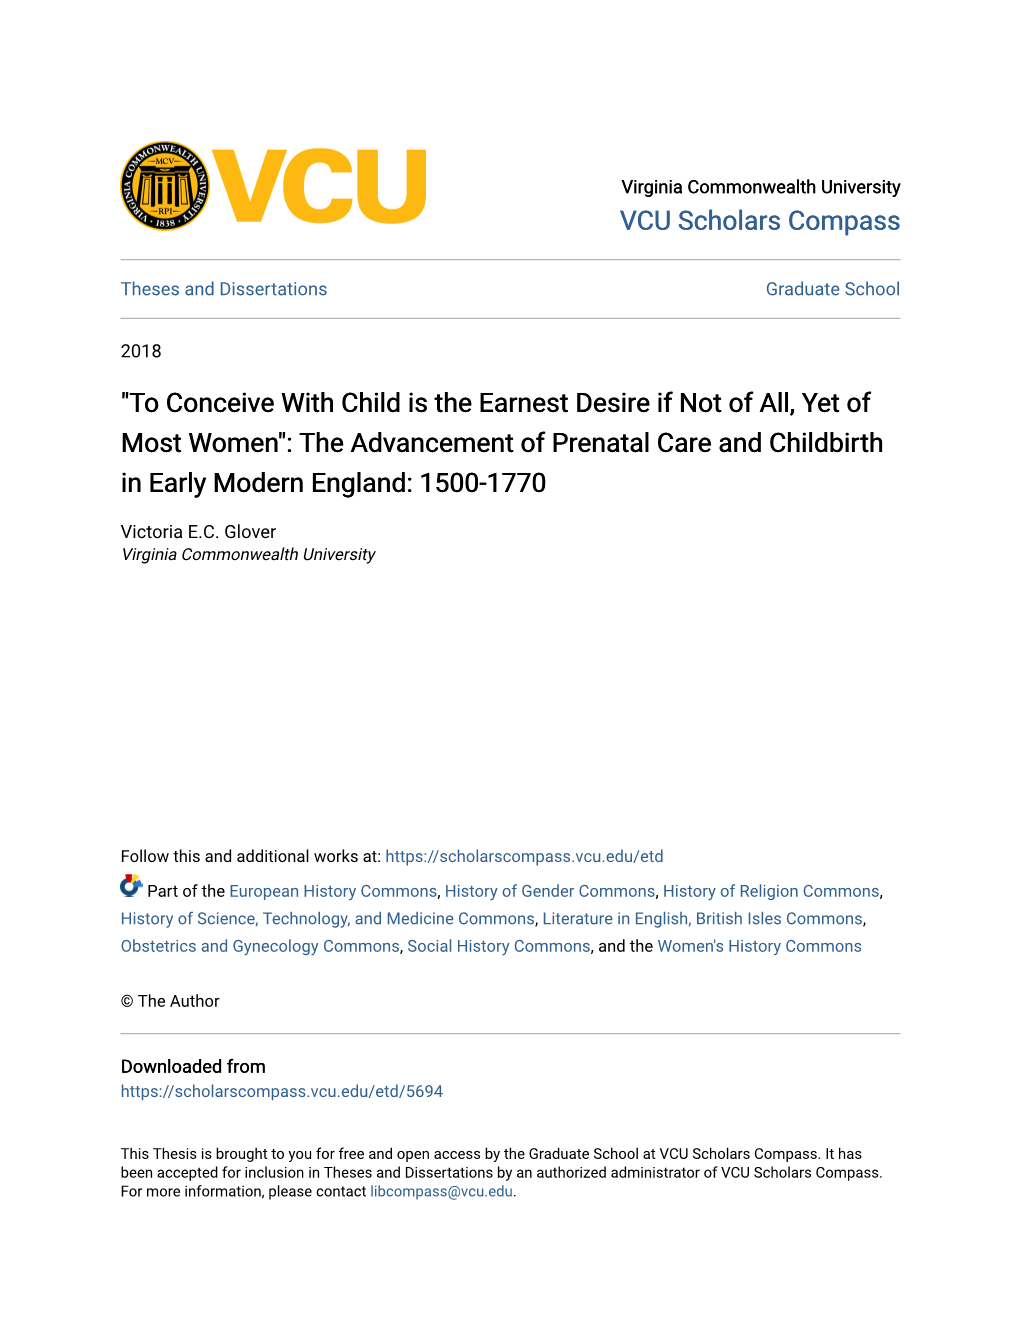 To Conceive with Child Is the Earnest Desire If Not of All, Yet of Most Women": the Advancement of Prenatal Care and Childbirth in Early Modern England: 1500-1770